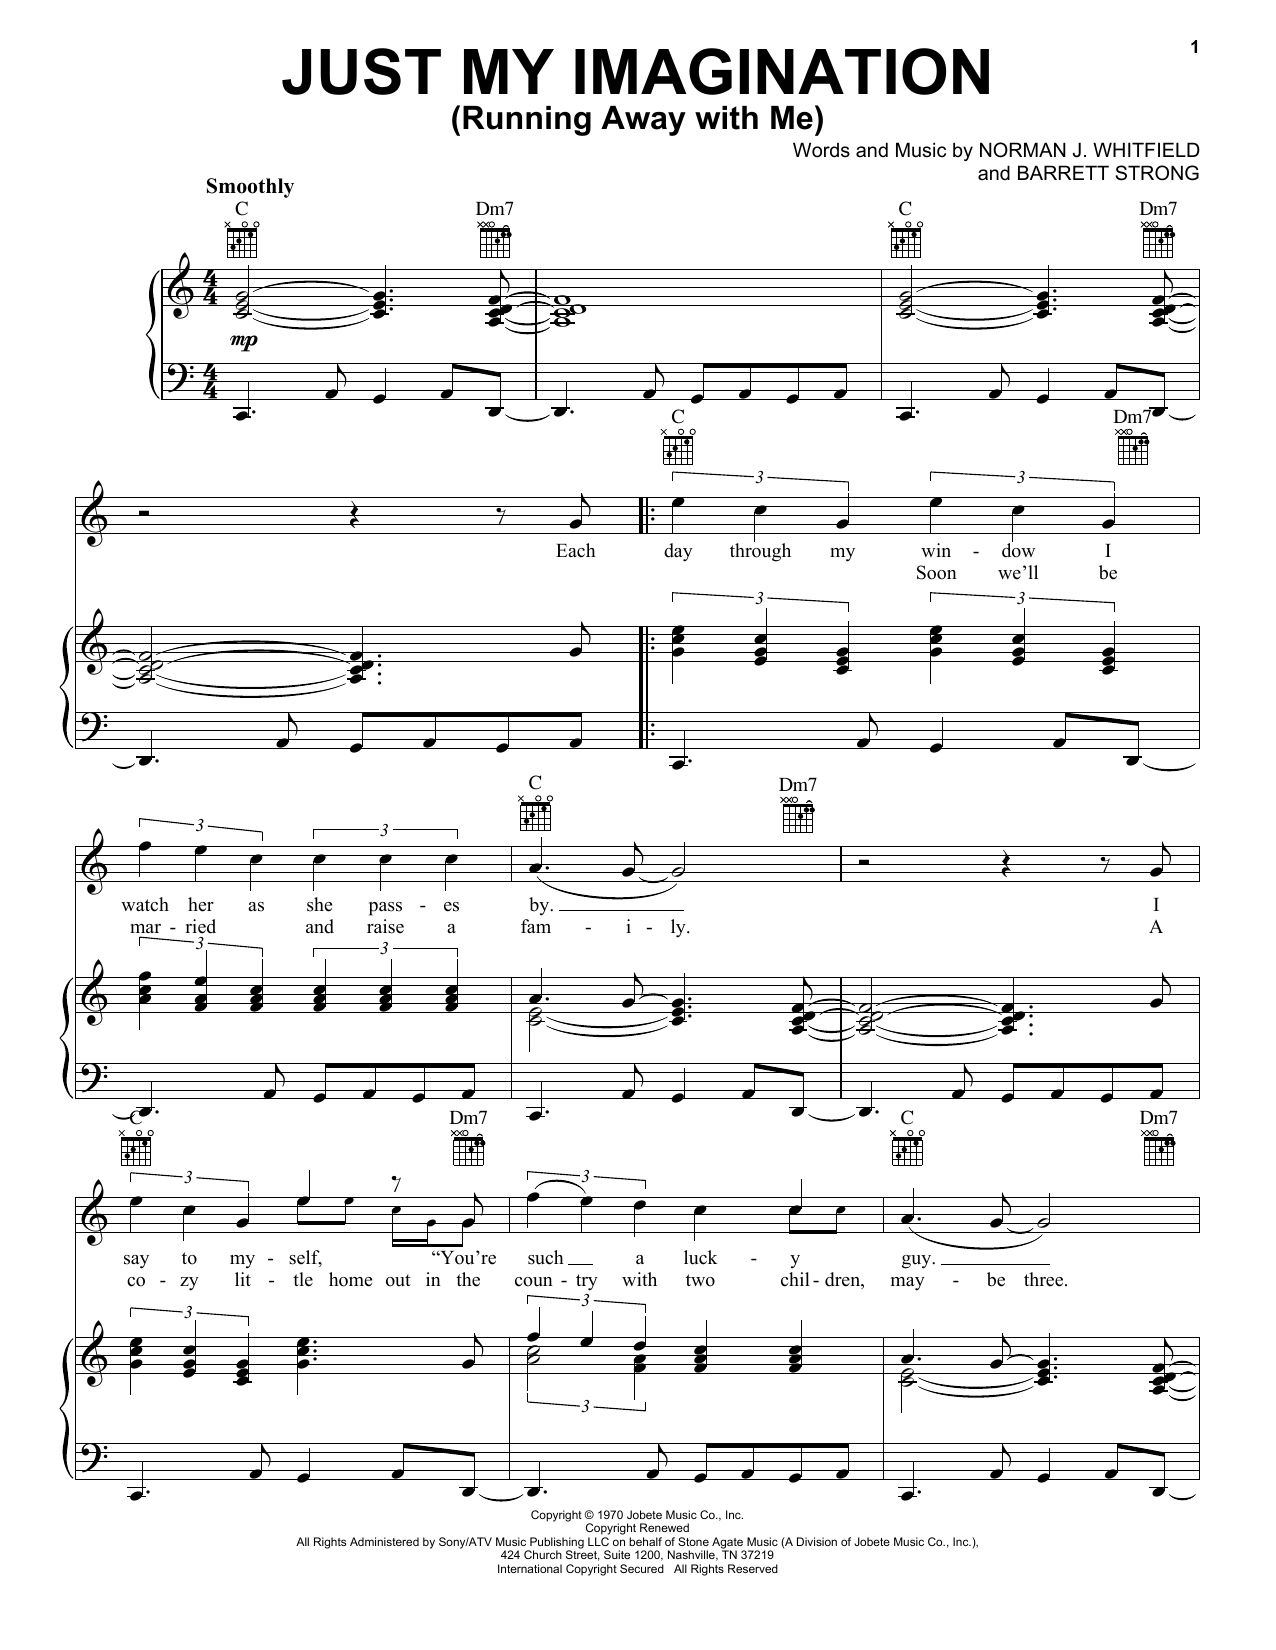 The Temptations Just My Imagination (Running Away With Me) sheet music notes printable PDF score